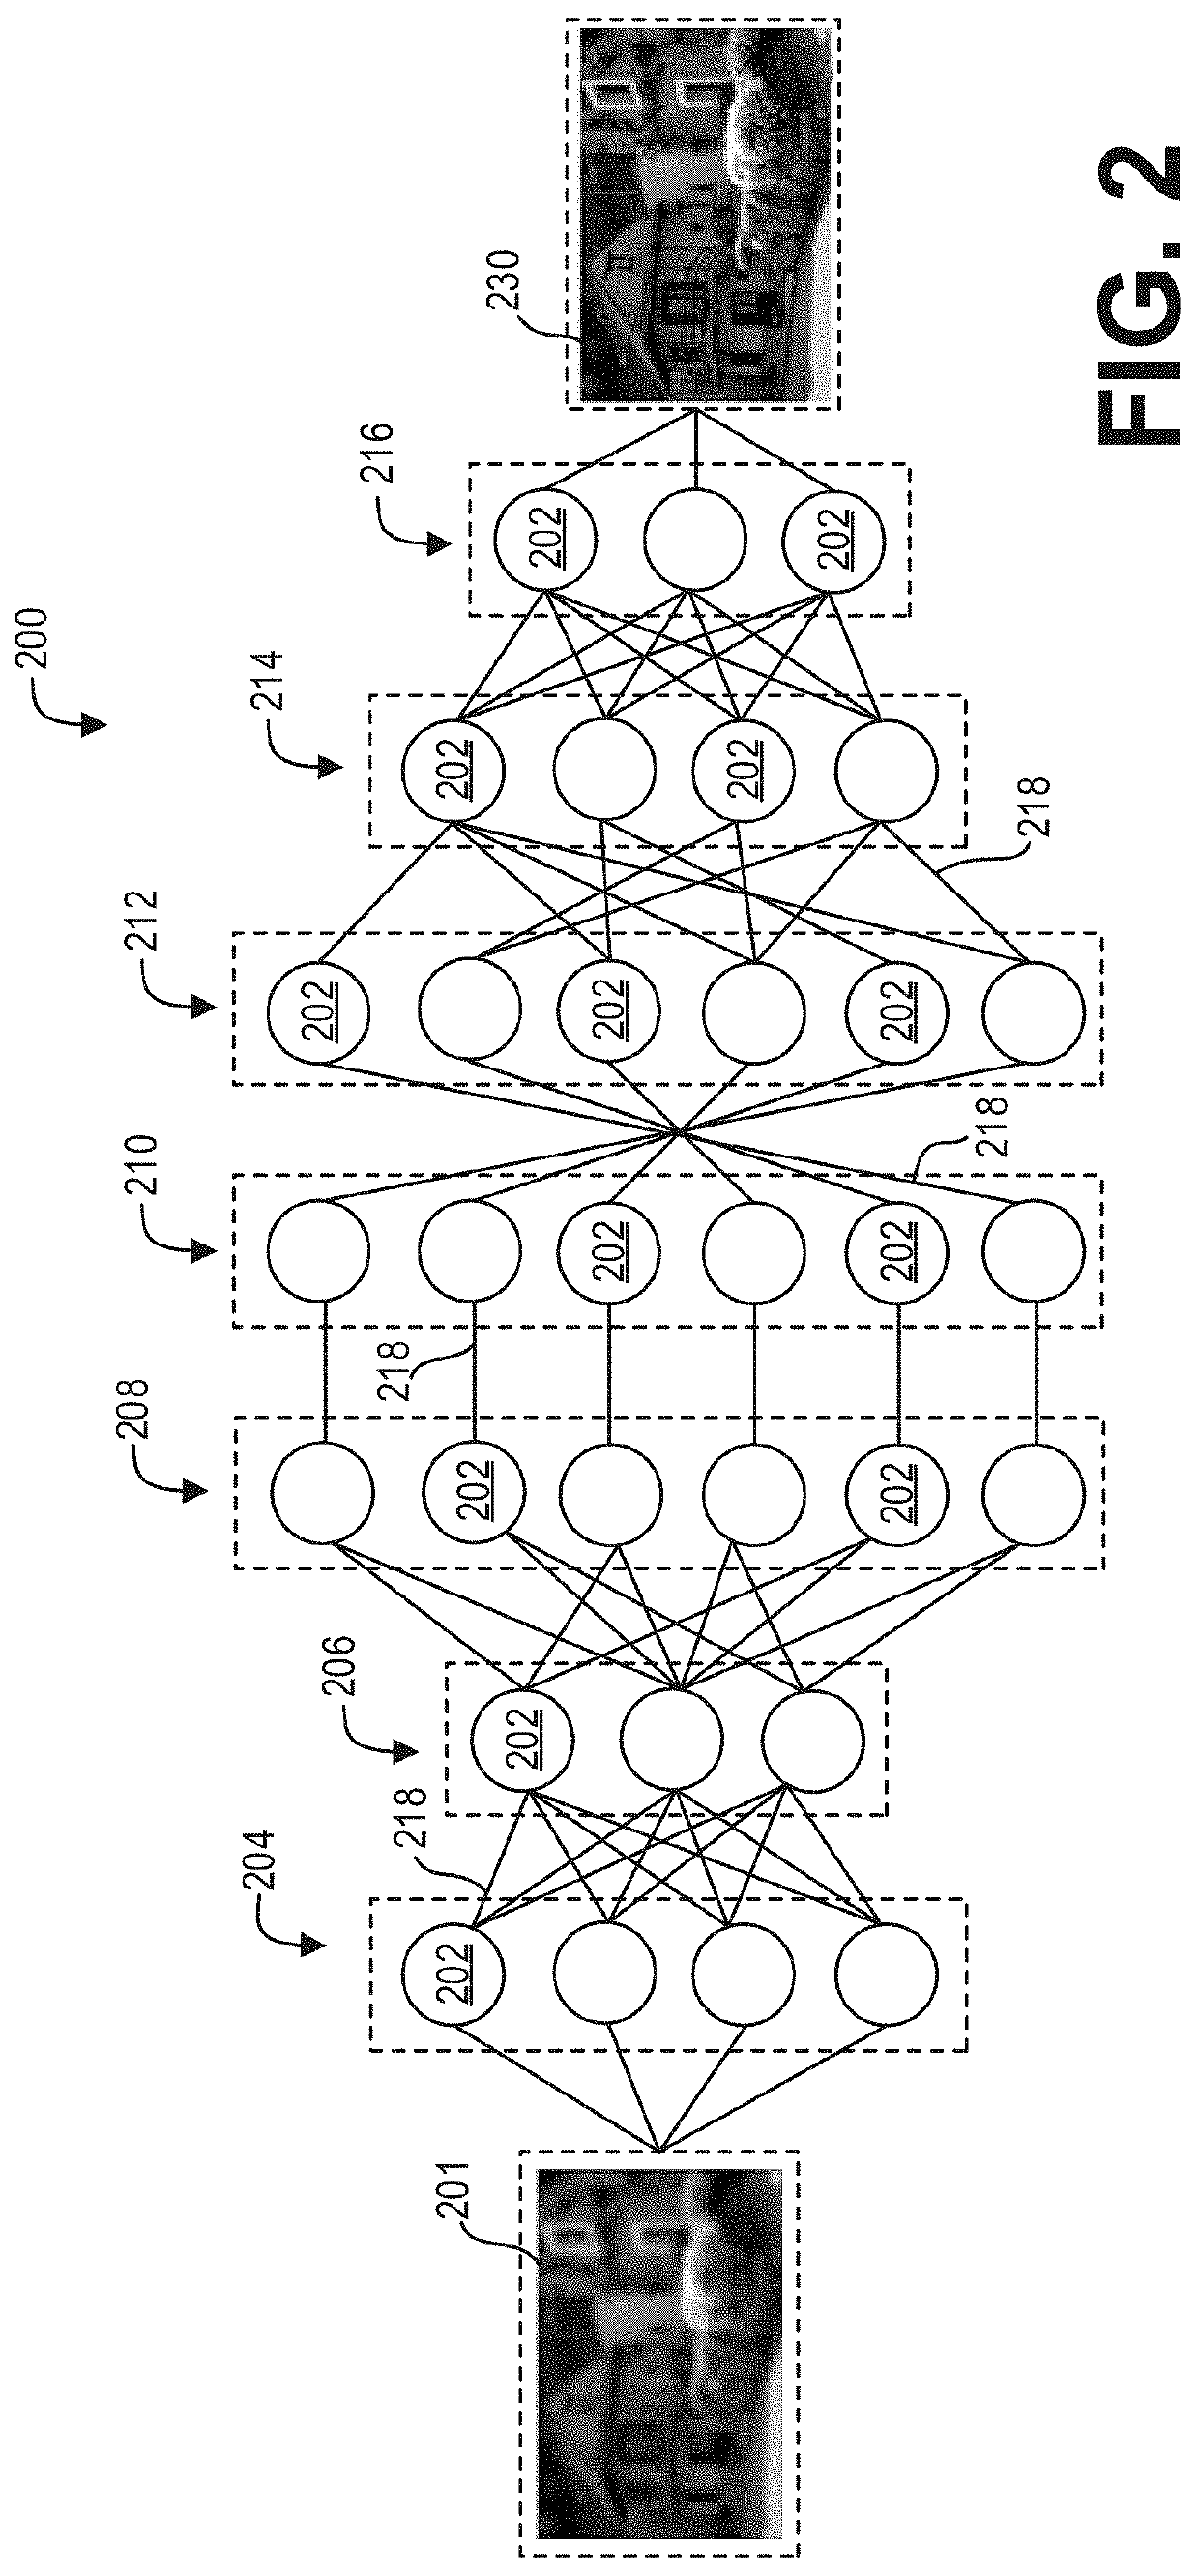 Systems and methods for noise reduction in medical images with deep neural networks